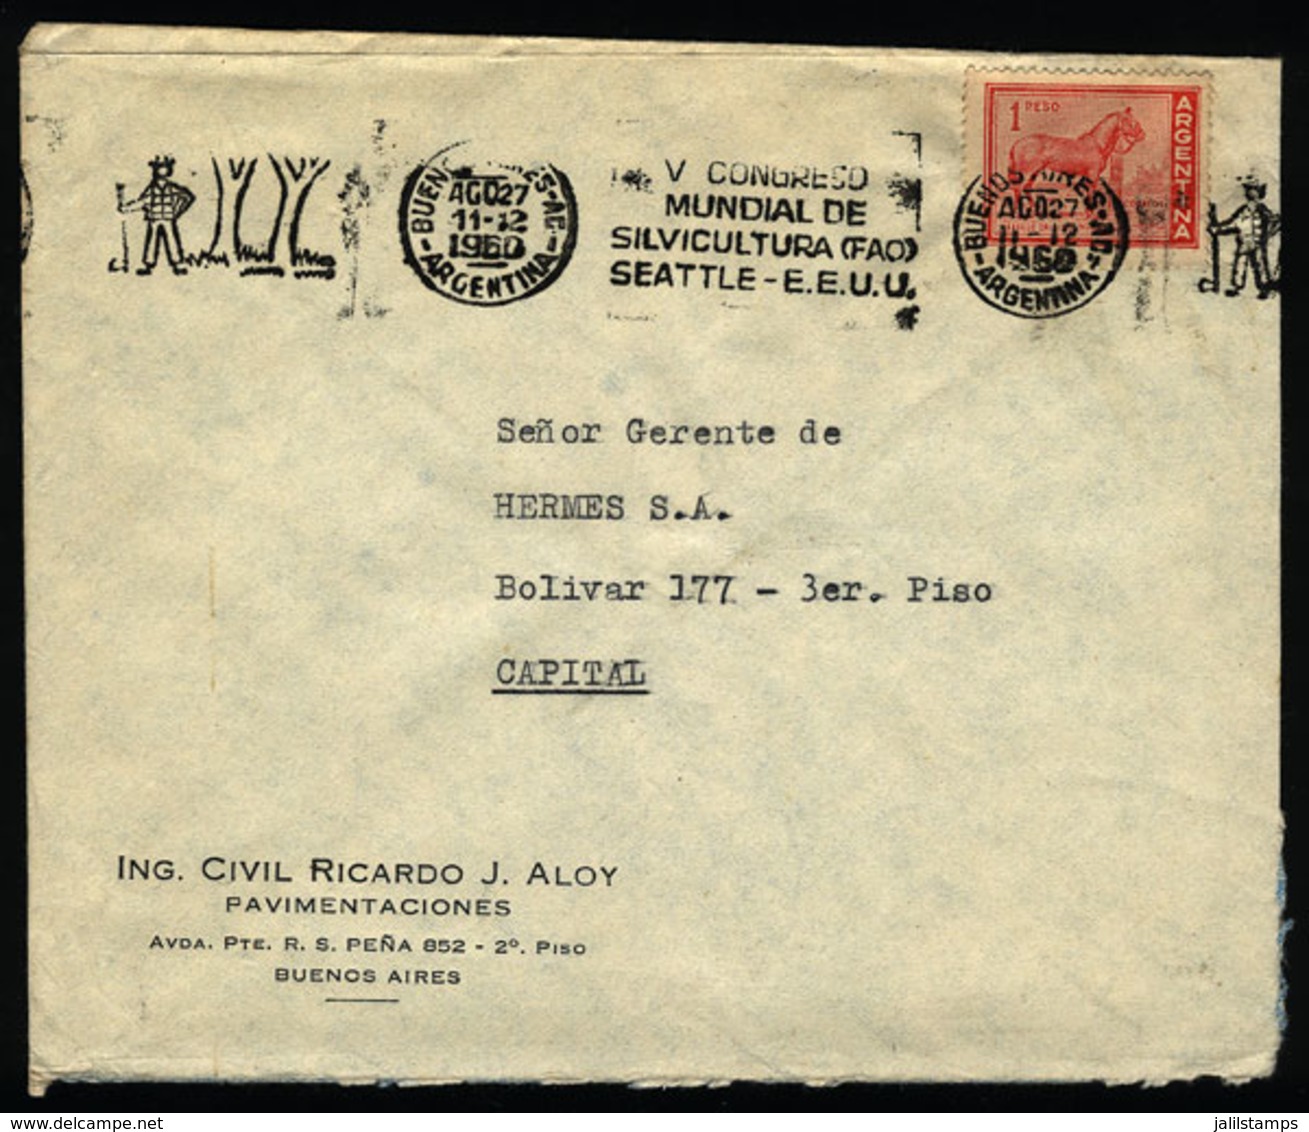 ARGENTINA: Cover Used In Buenos Aires On 27/AU/1960, With Slogan Cancel "Intl. Congress Of Forestry - Seattle USA", VF Q - Lettres & Documents